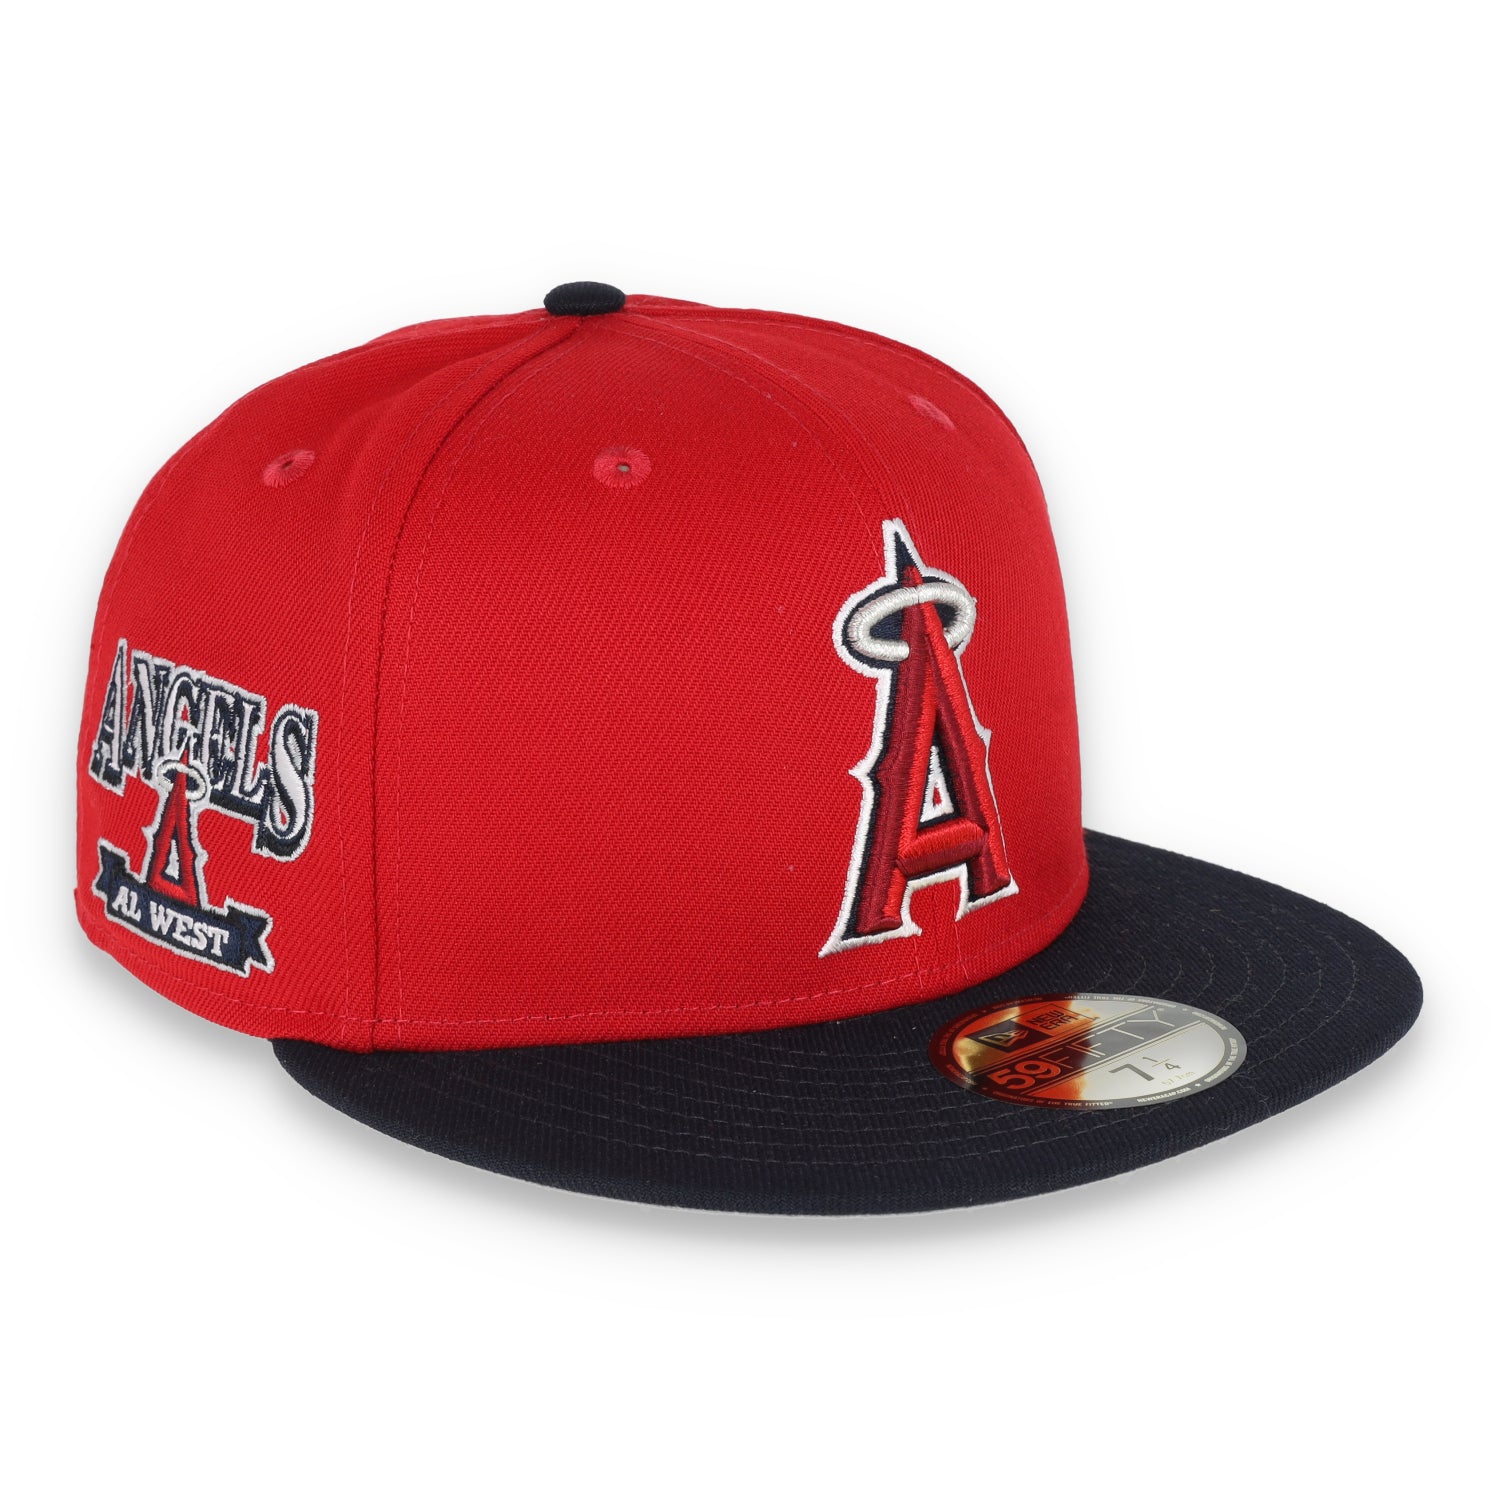 New Era Los Angeles Angels AL West 59Fifty Fitted Hat-Black/Red